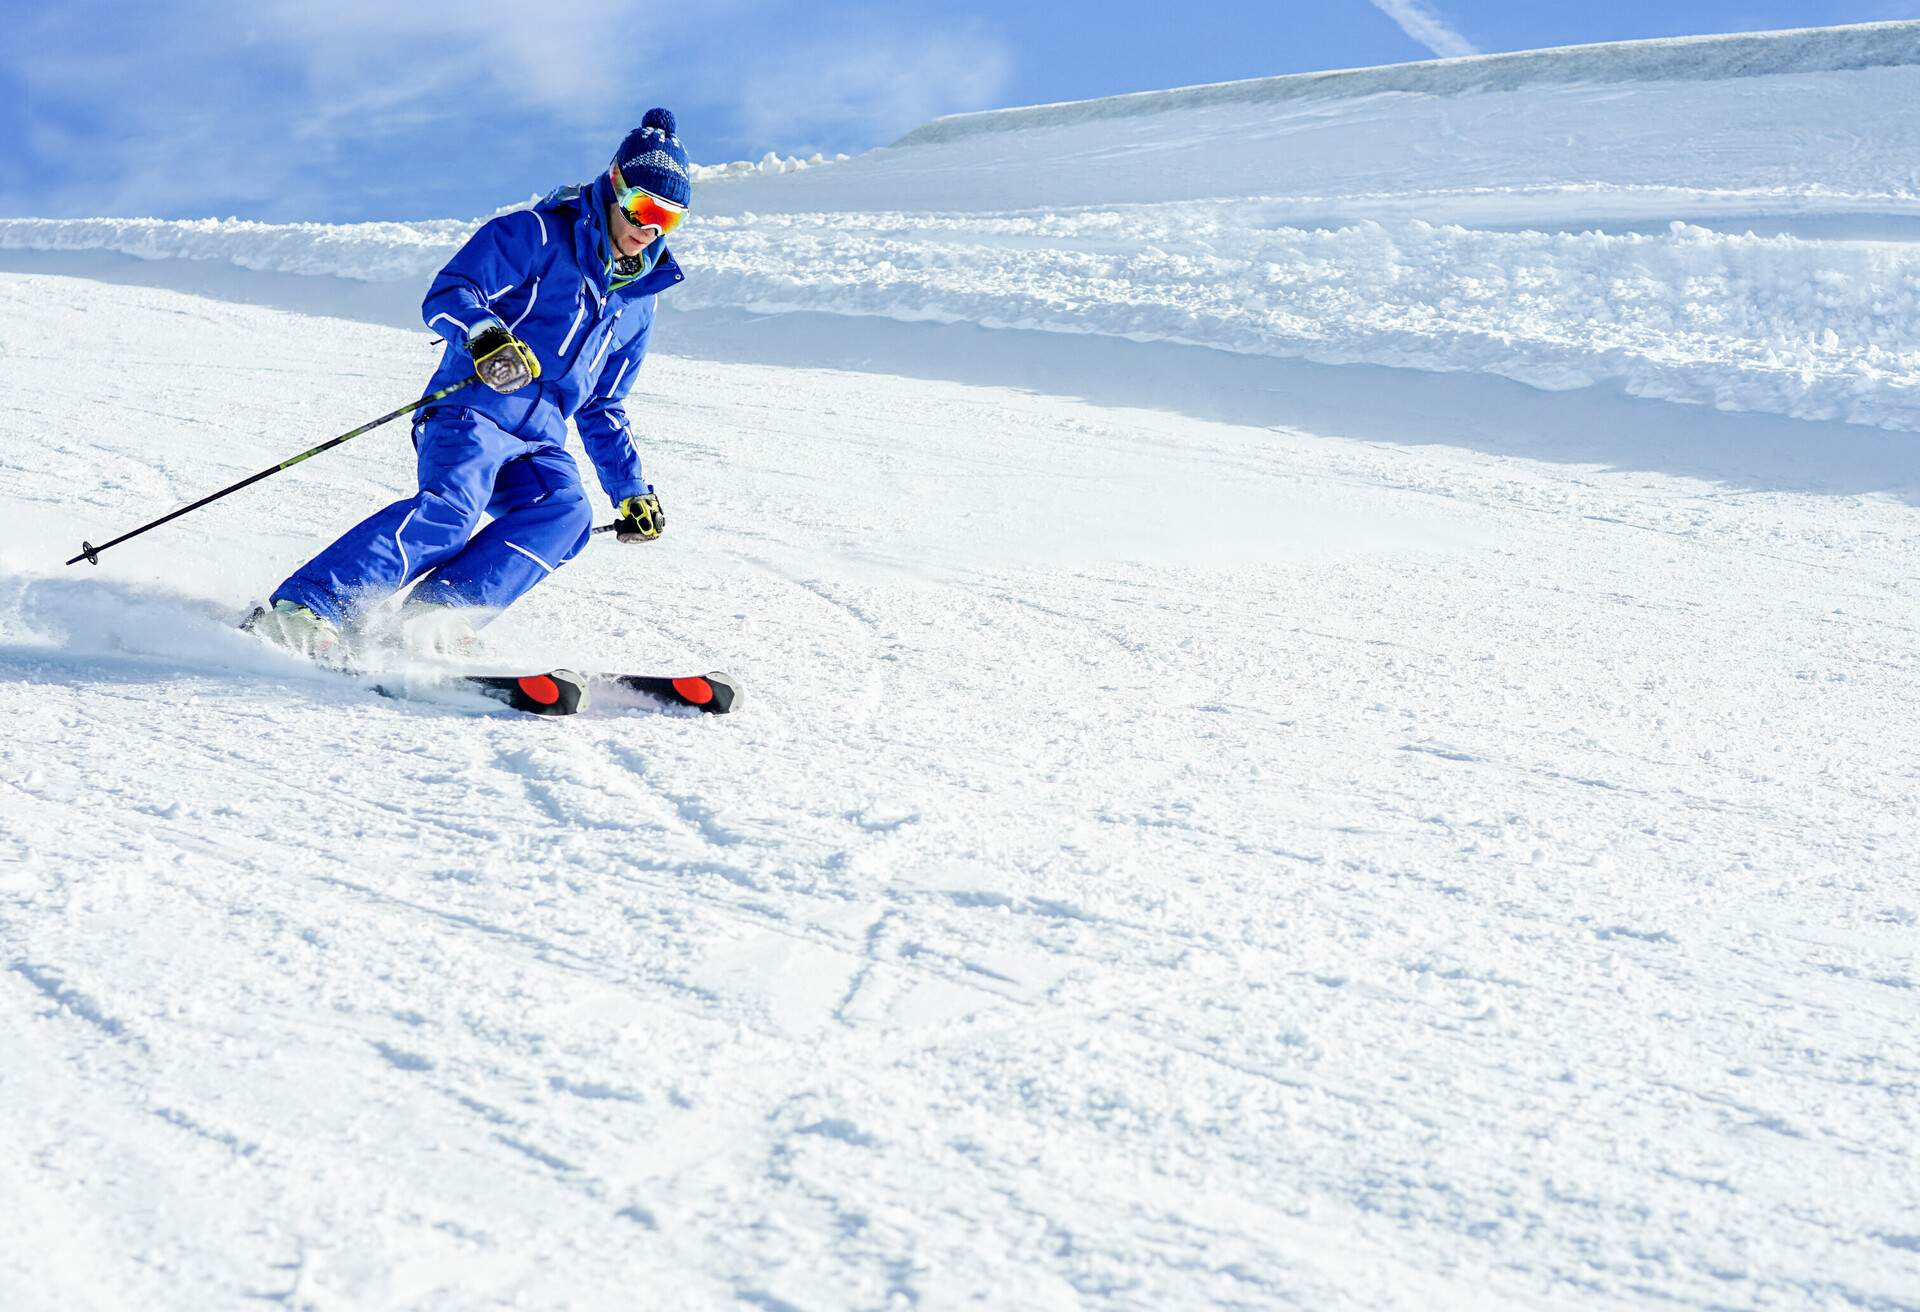 A man in a blue ski outfit sweeping through a piste.